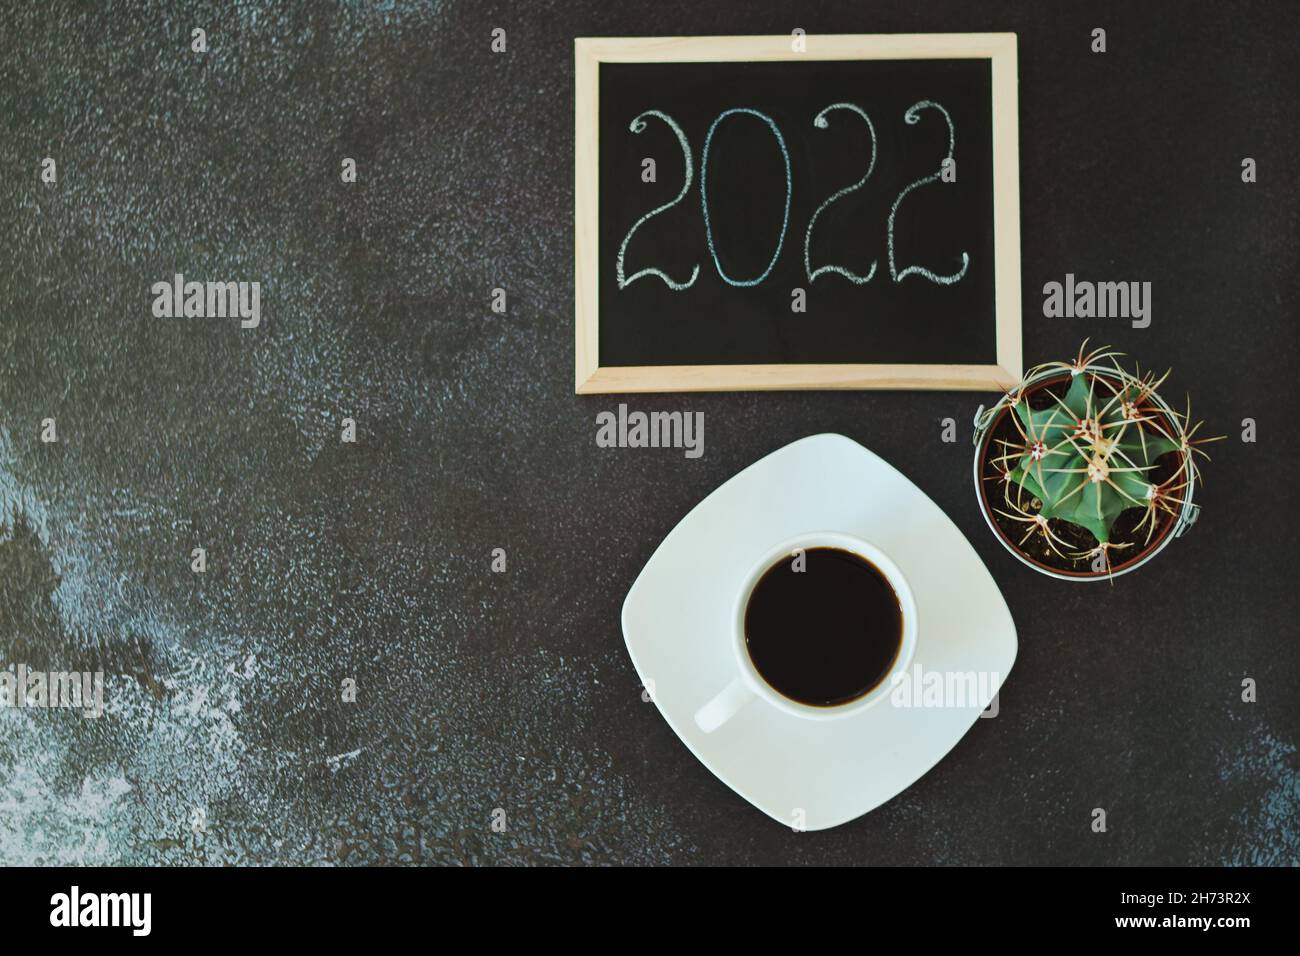 Christmas, New Year flat lay on black background. Christmas decorations with cup of hot coffee. Numbers 2022 on a writing board. Cacti. Top view Stock Photo